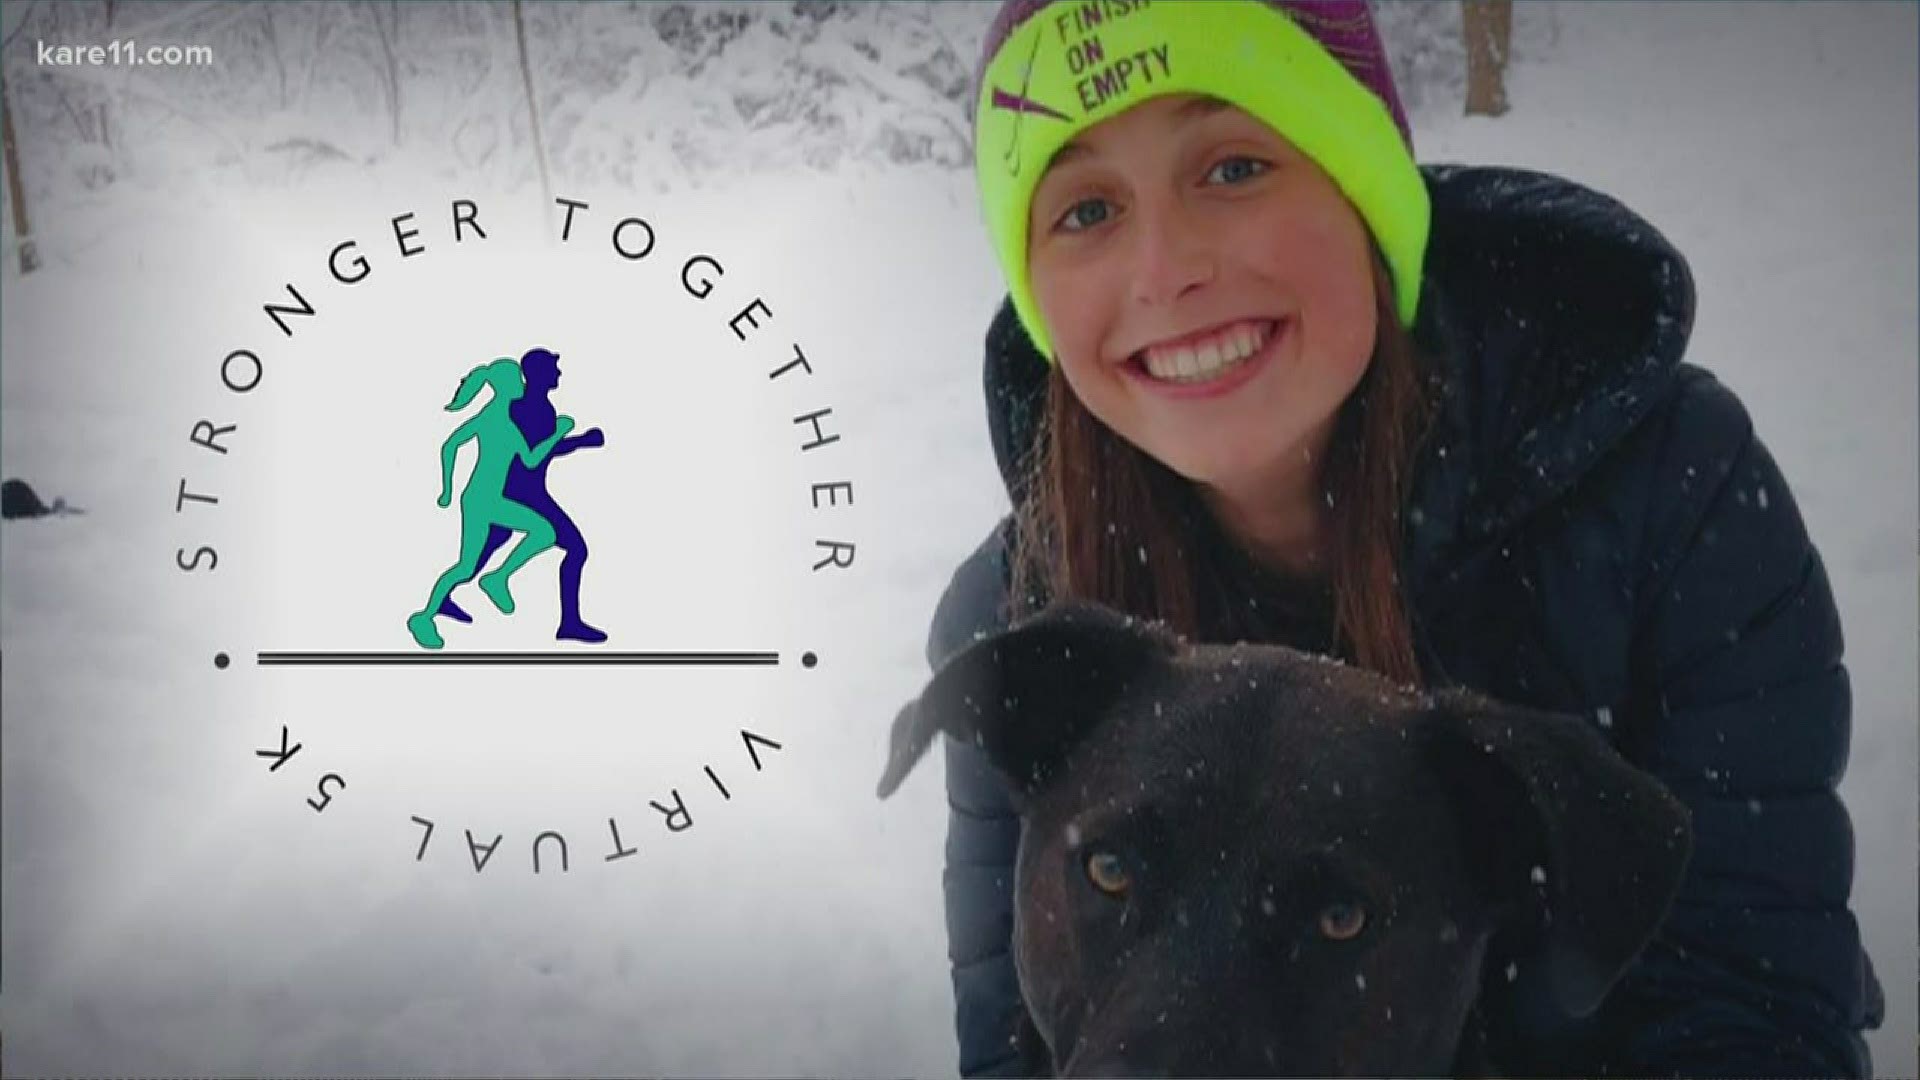 Minnetonka High School freshman runner is coordinating a virtual 5K charity race to raise money for the Twin Cities United Way's COVID-19 Response and Recovery Fund.